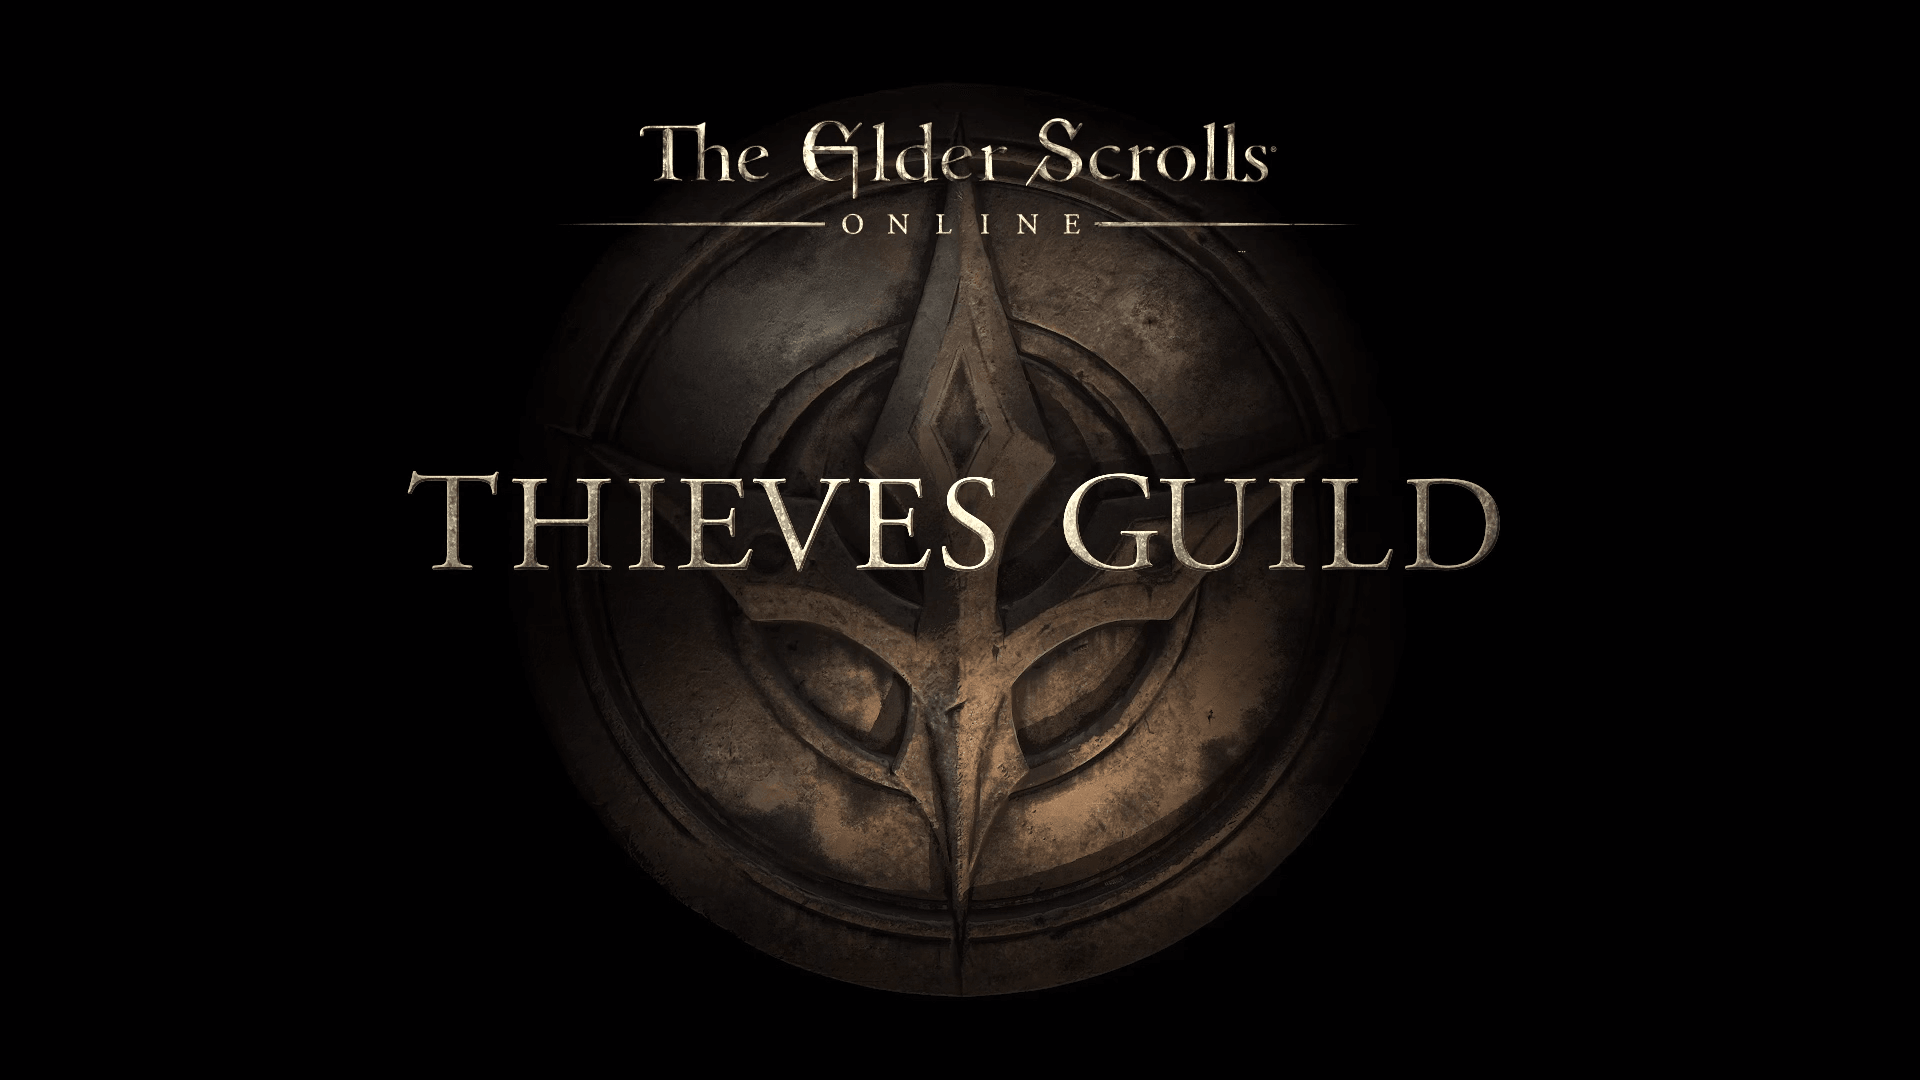 The_Elder_Scrolls_Online_Thieves_Guild_Cover